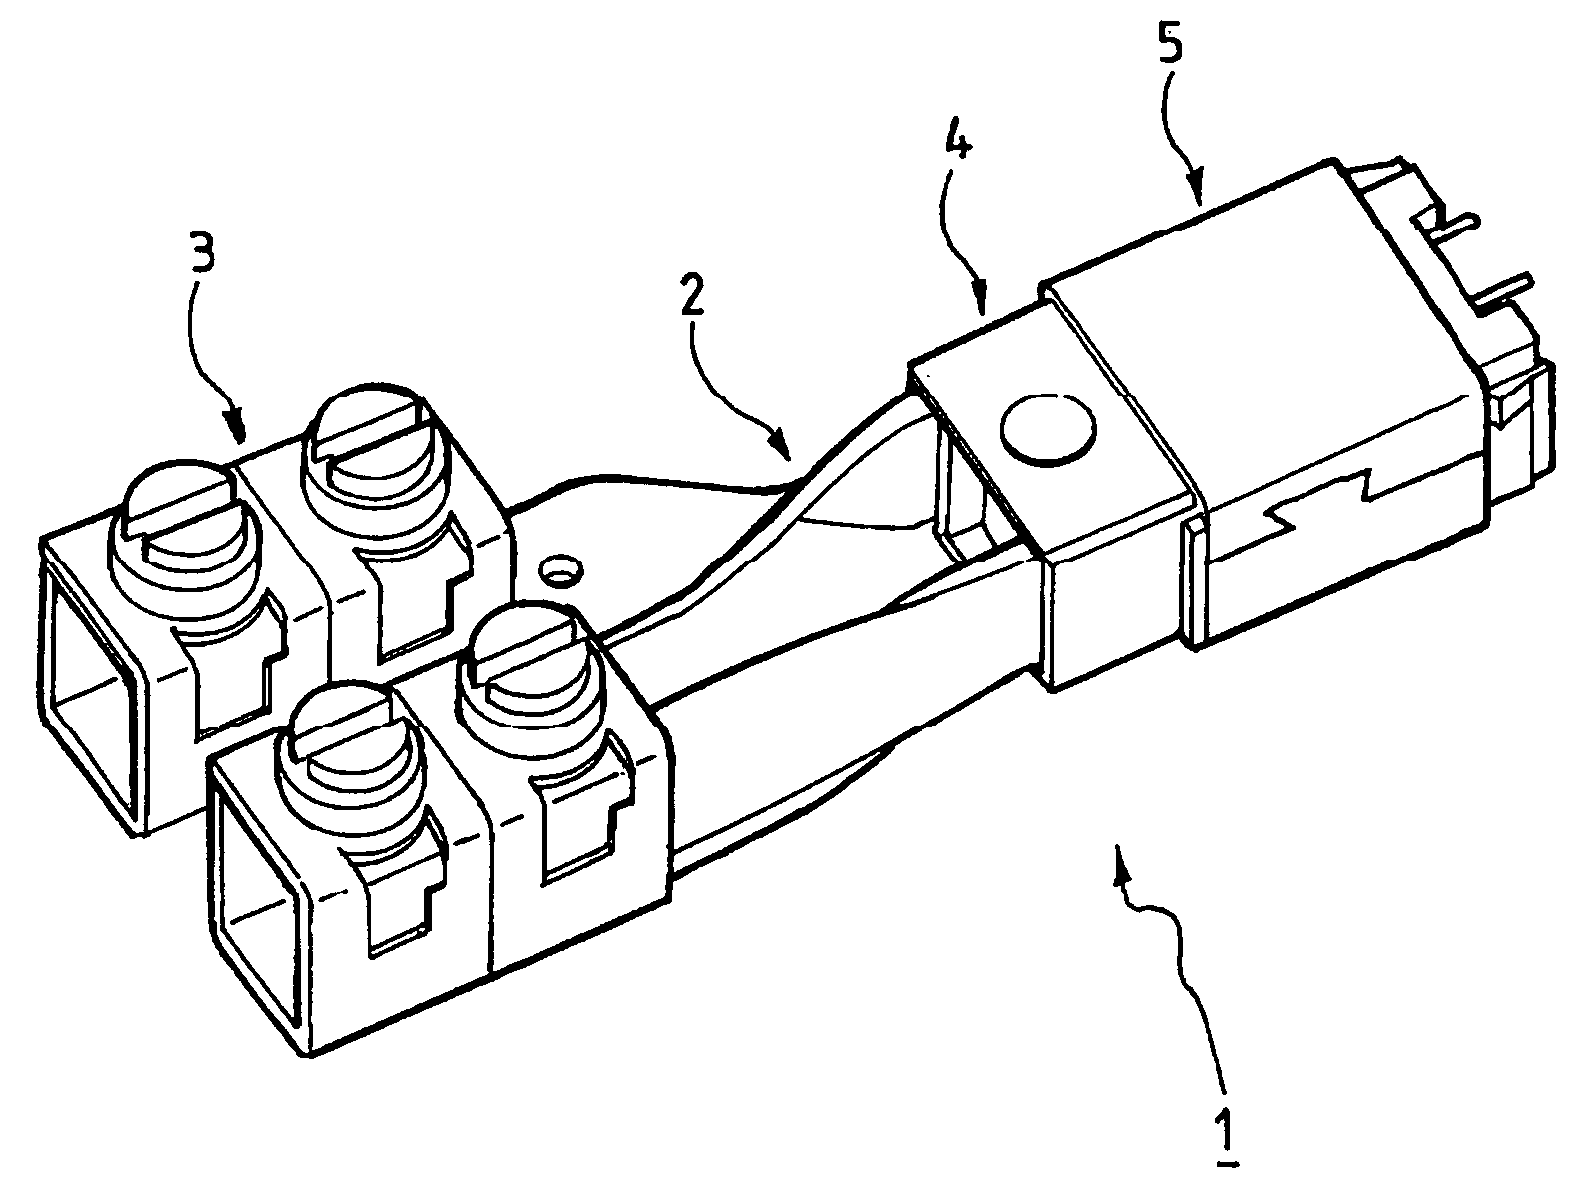 Device for measuring an electric current